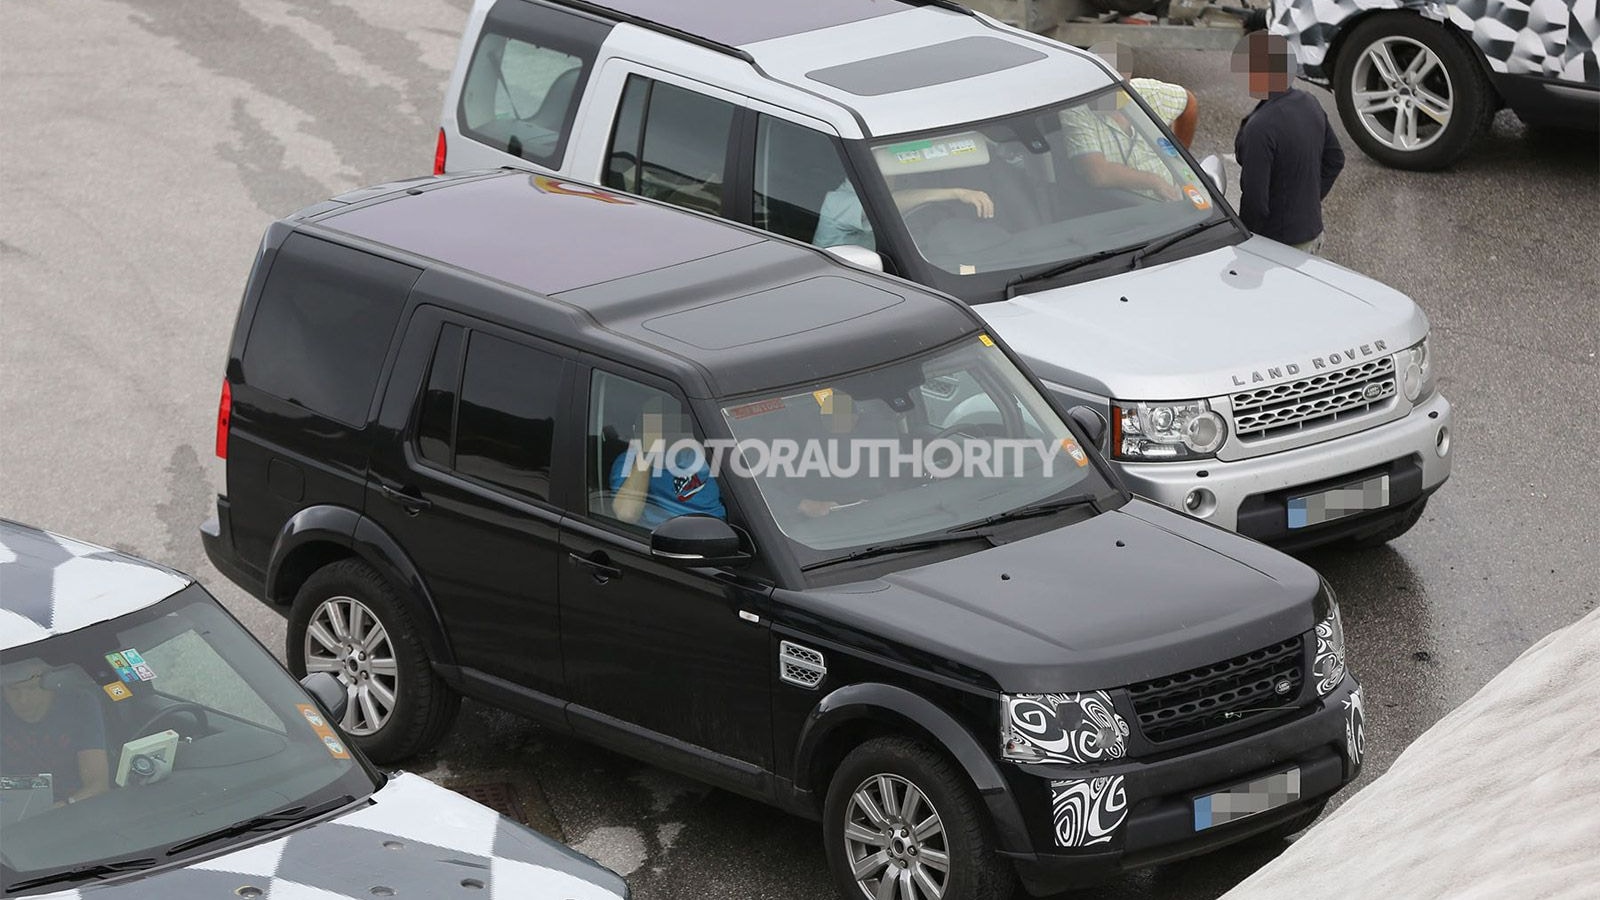 2014 Land Rover LR4 (Discovery) facelift spy shots